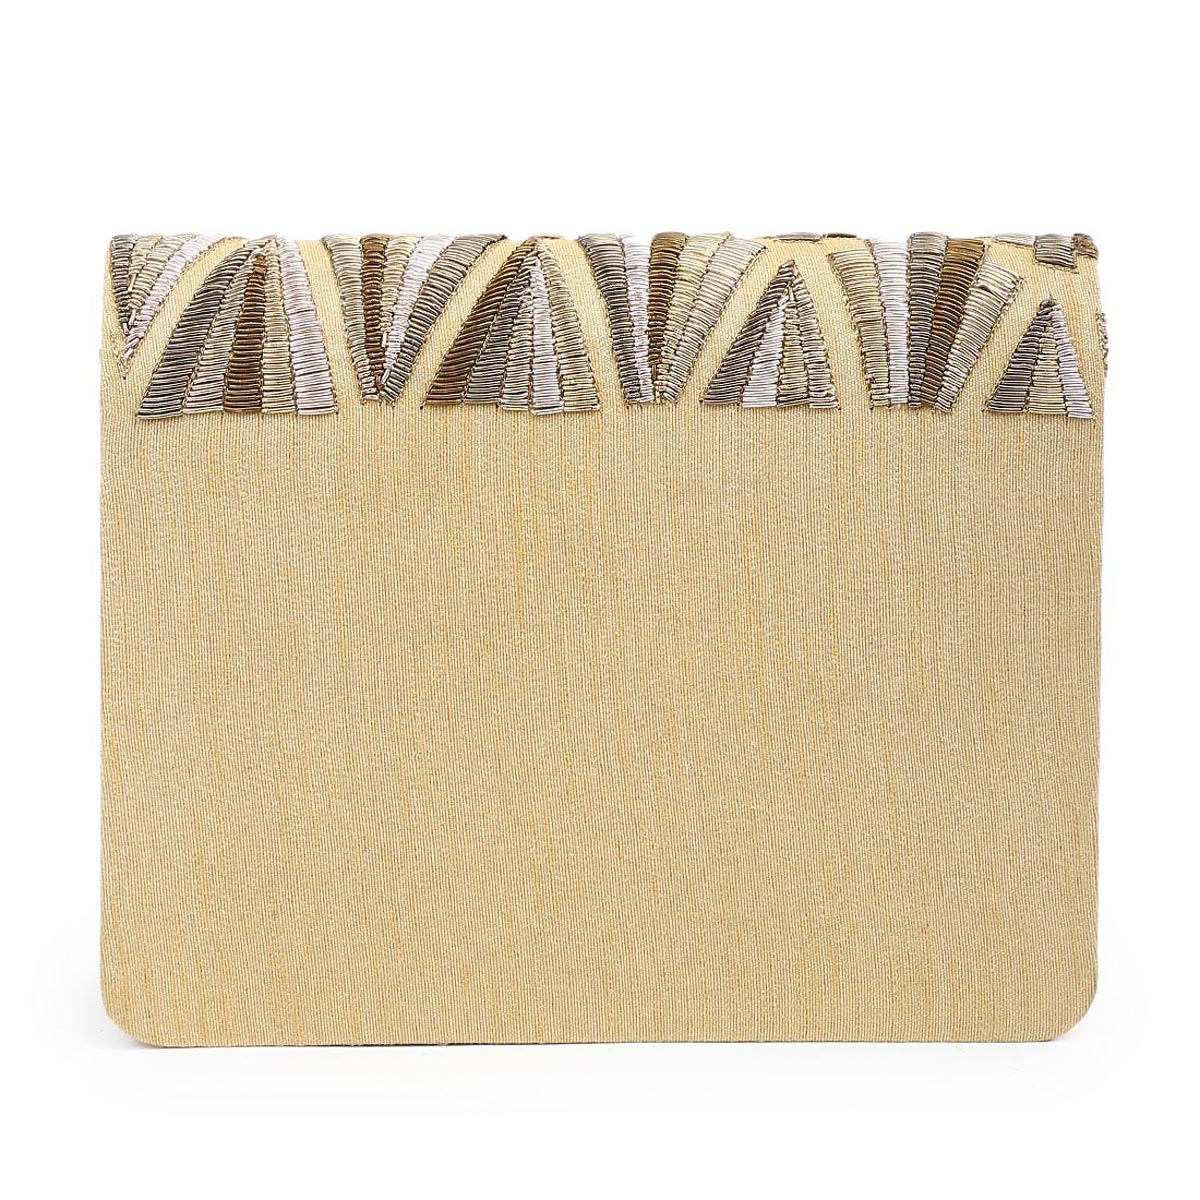 All shades of gold clutch